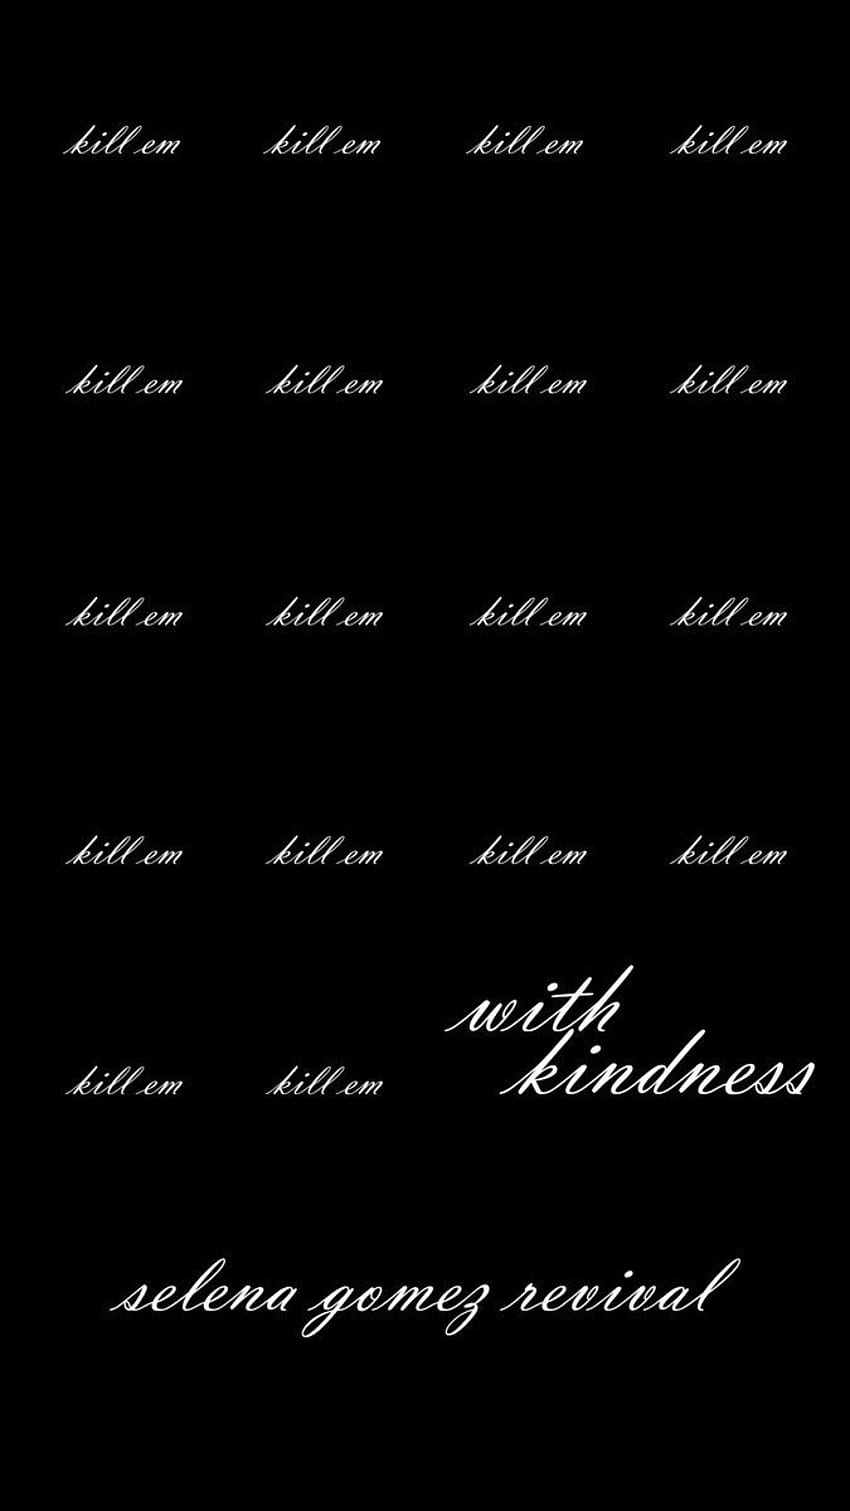 - 'kill em with kindness' for home screen of iphone 5, 5c, and 5s. HD phone wallpaper